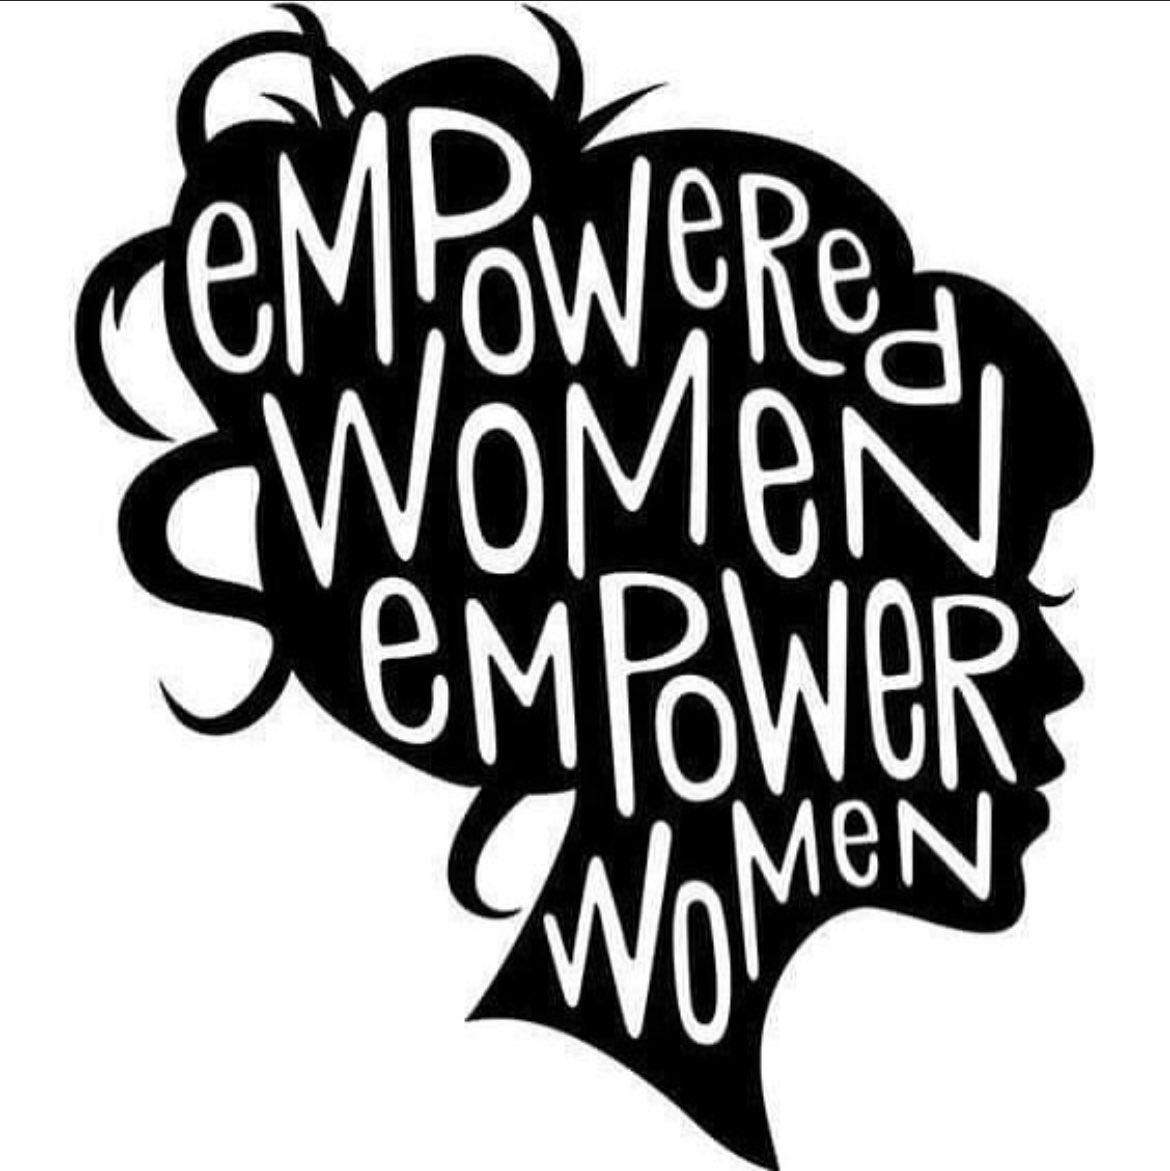 Thought this was a perfect time to remind myself that #empoweredwomenempowerwomen #getCarriedaway #Latina